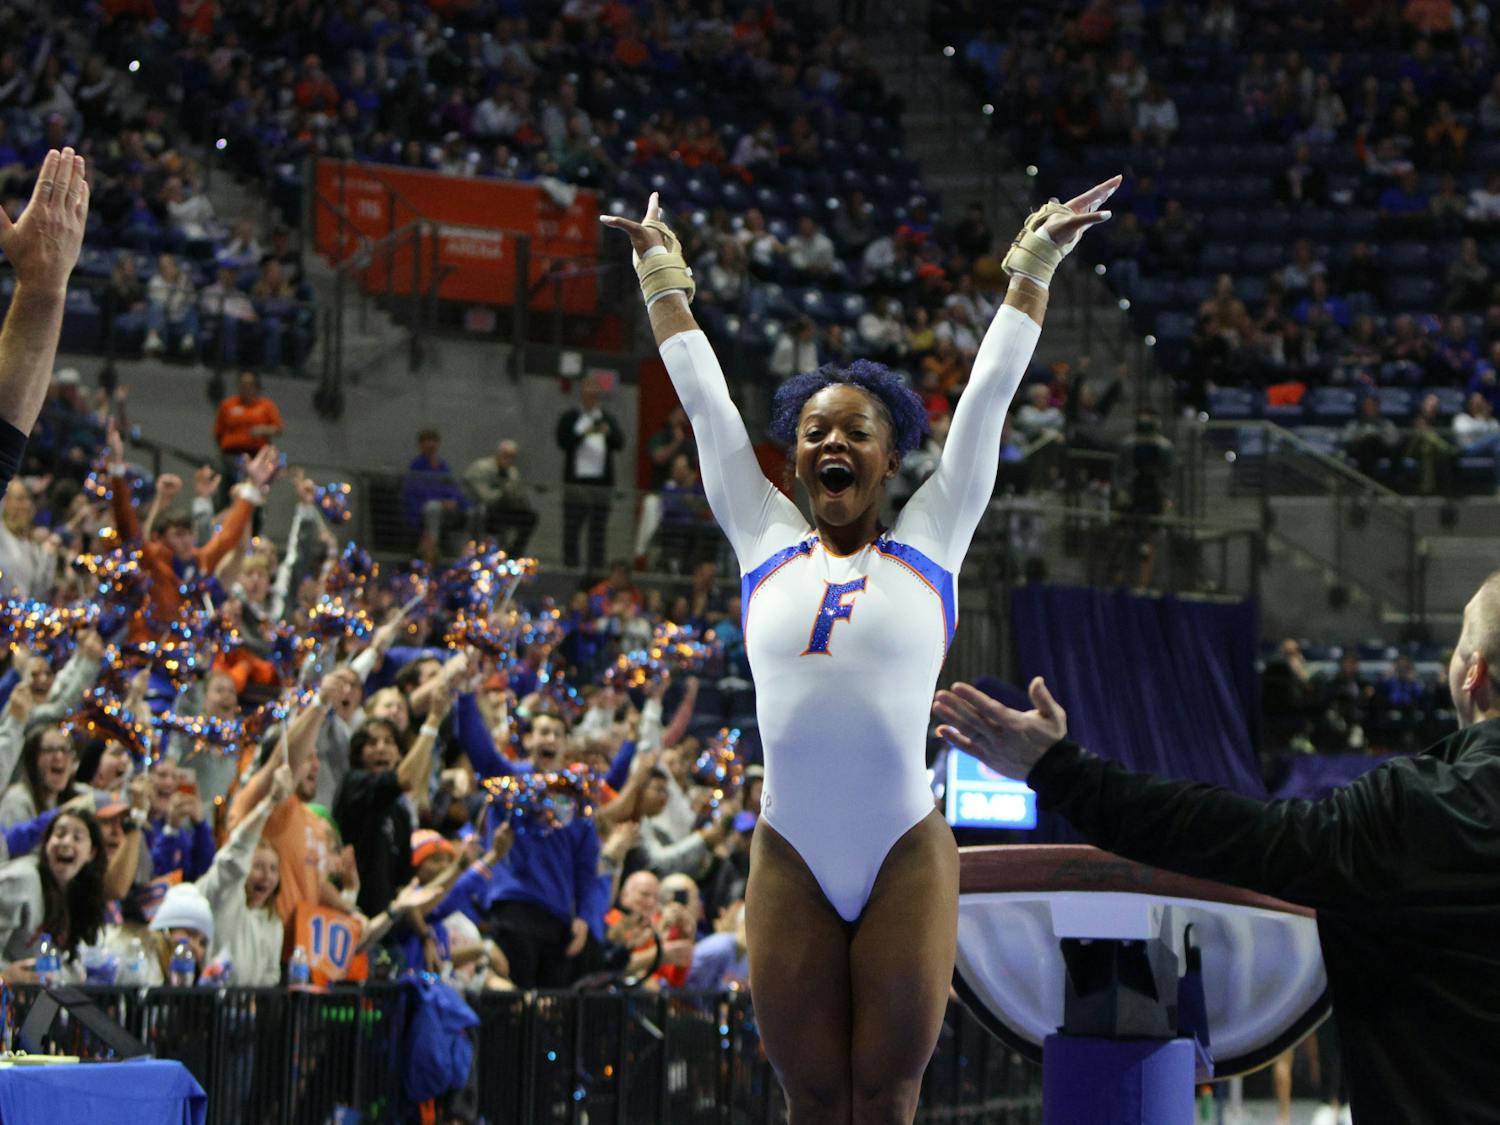 Florida gymnast Trinity Thomas celebrates after a perfect landing from her vault routine against the Georgia Bulldogs Friday, Jan. 27, 2023.